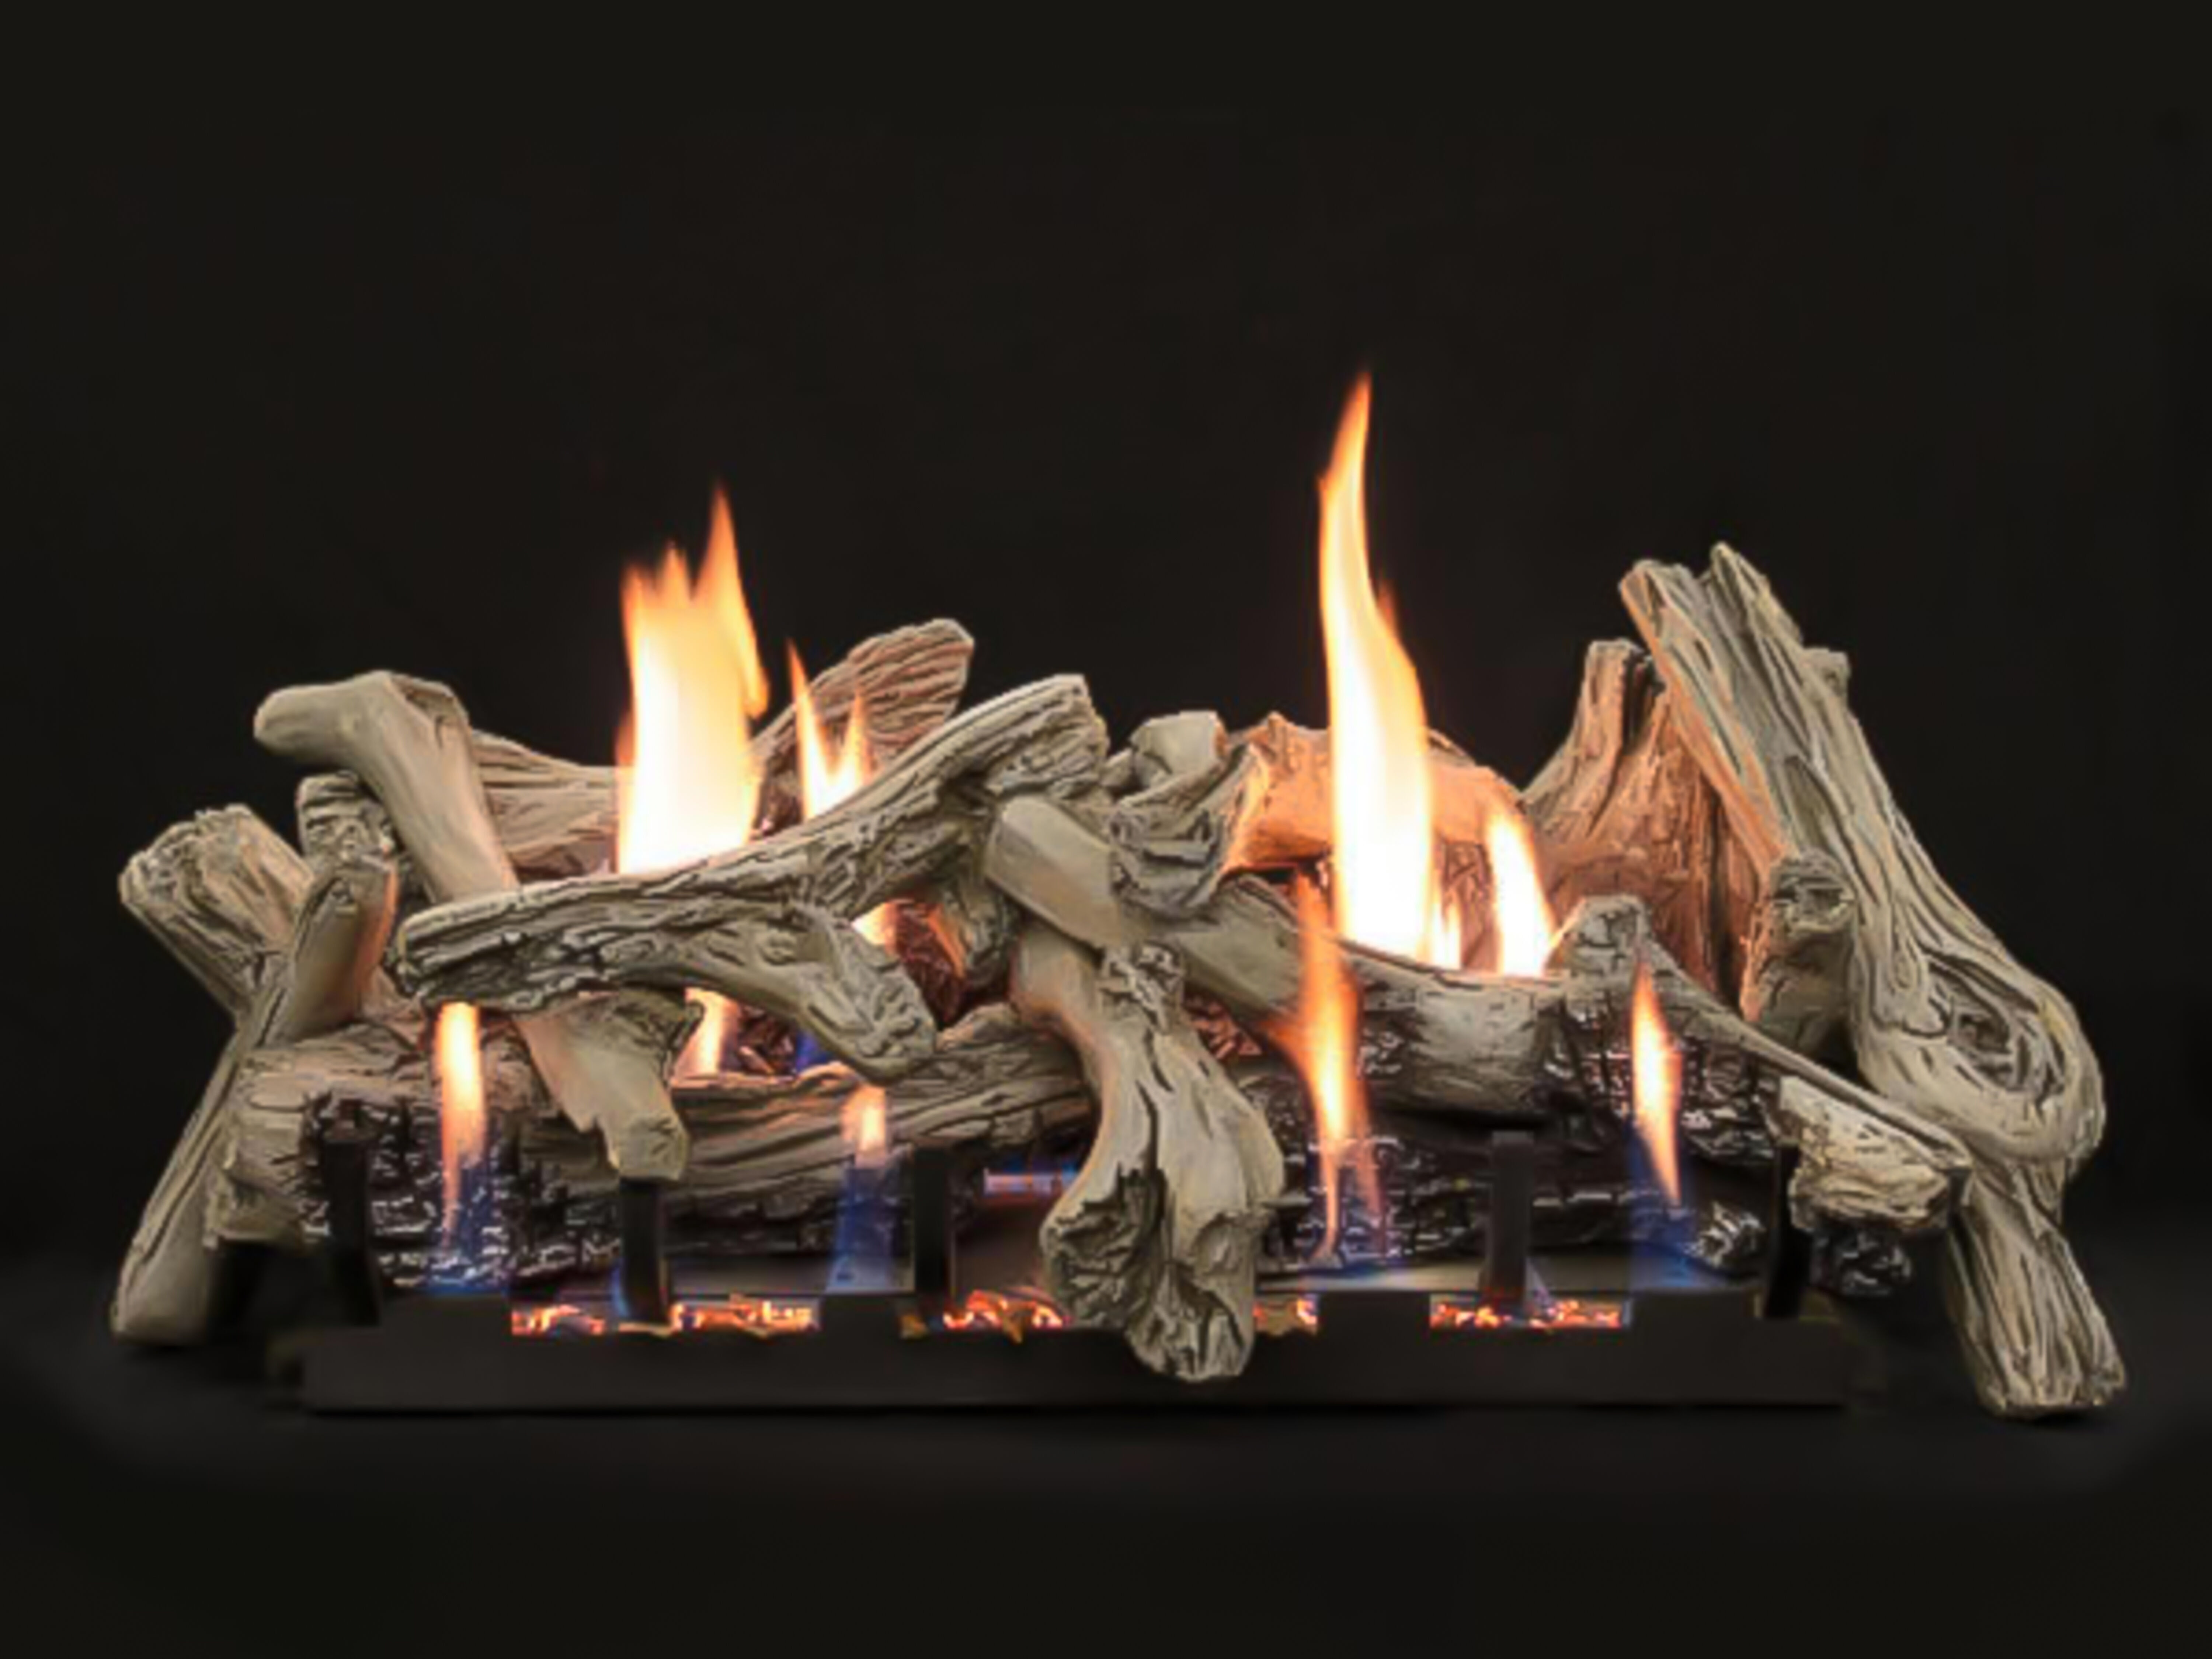 The Driftwood Burncrete gas log set by Empire features a beachy, weathered finish and natural-looking flames.